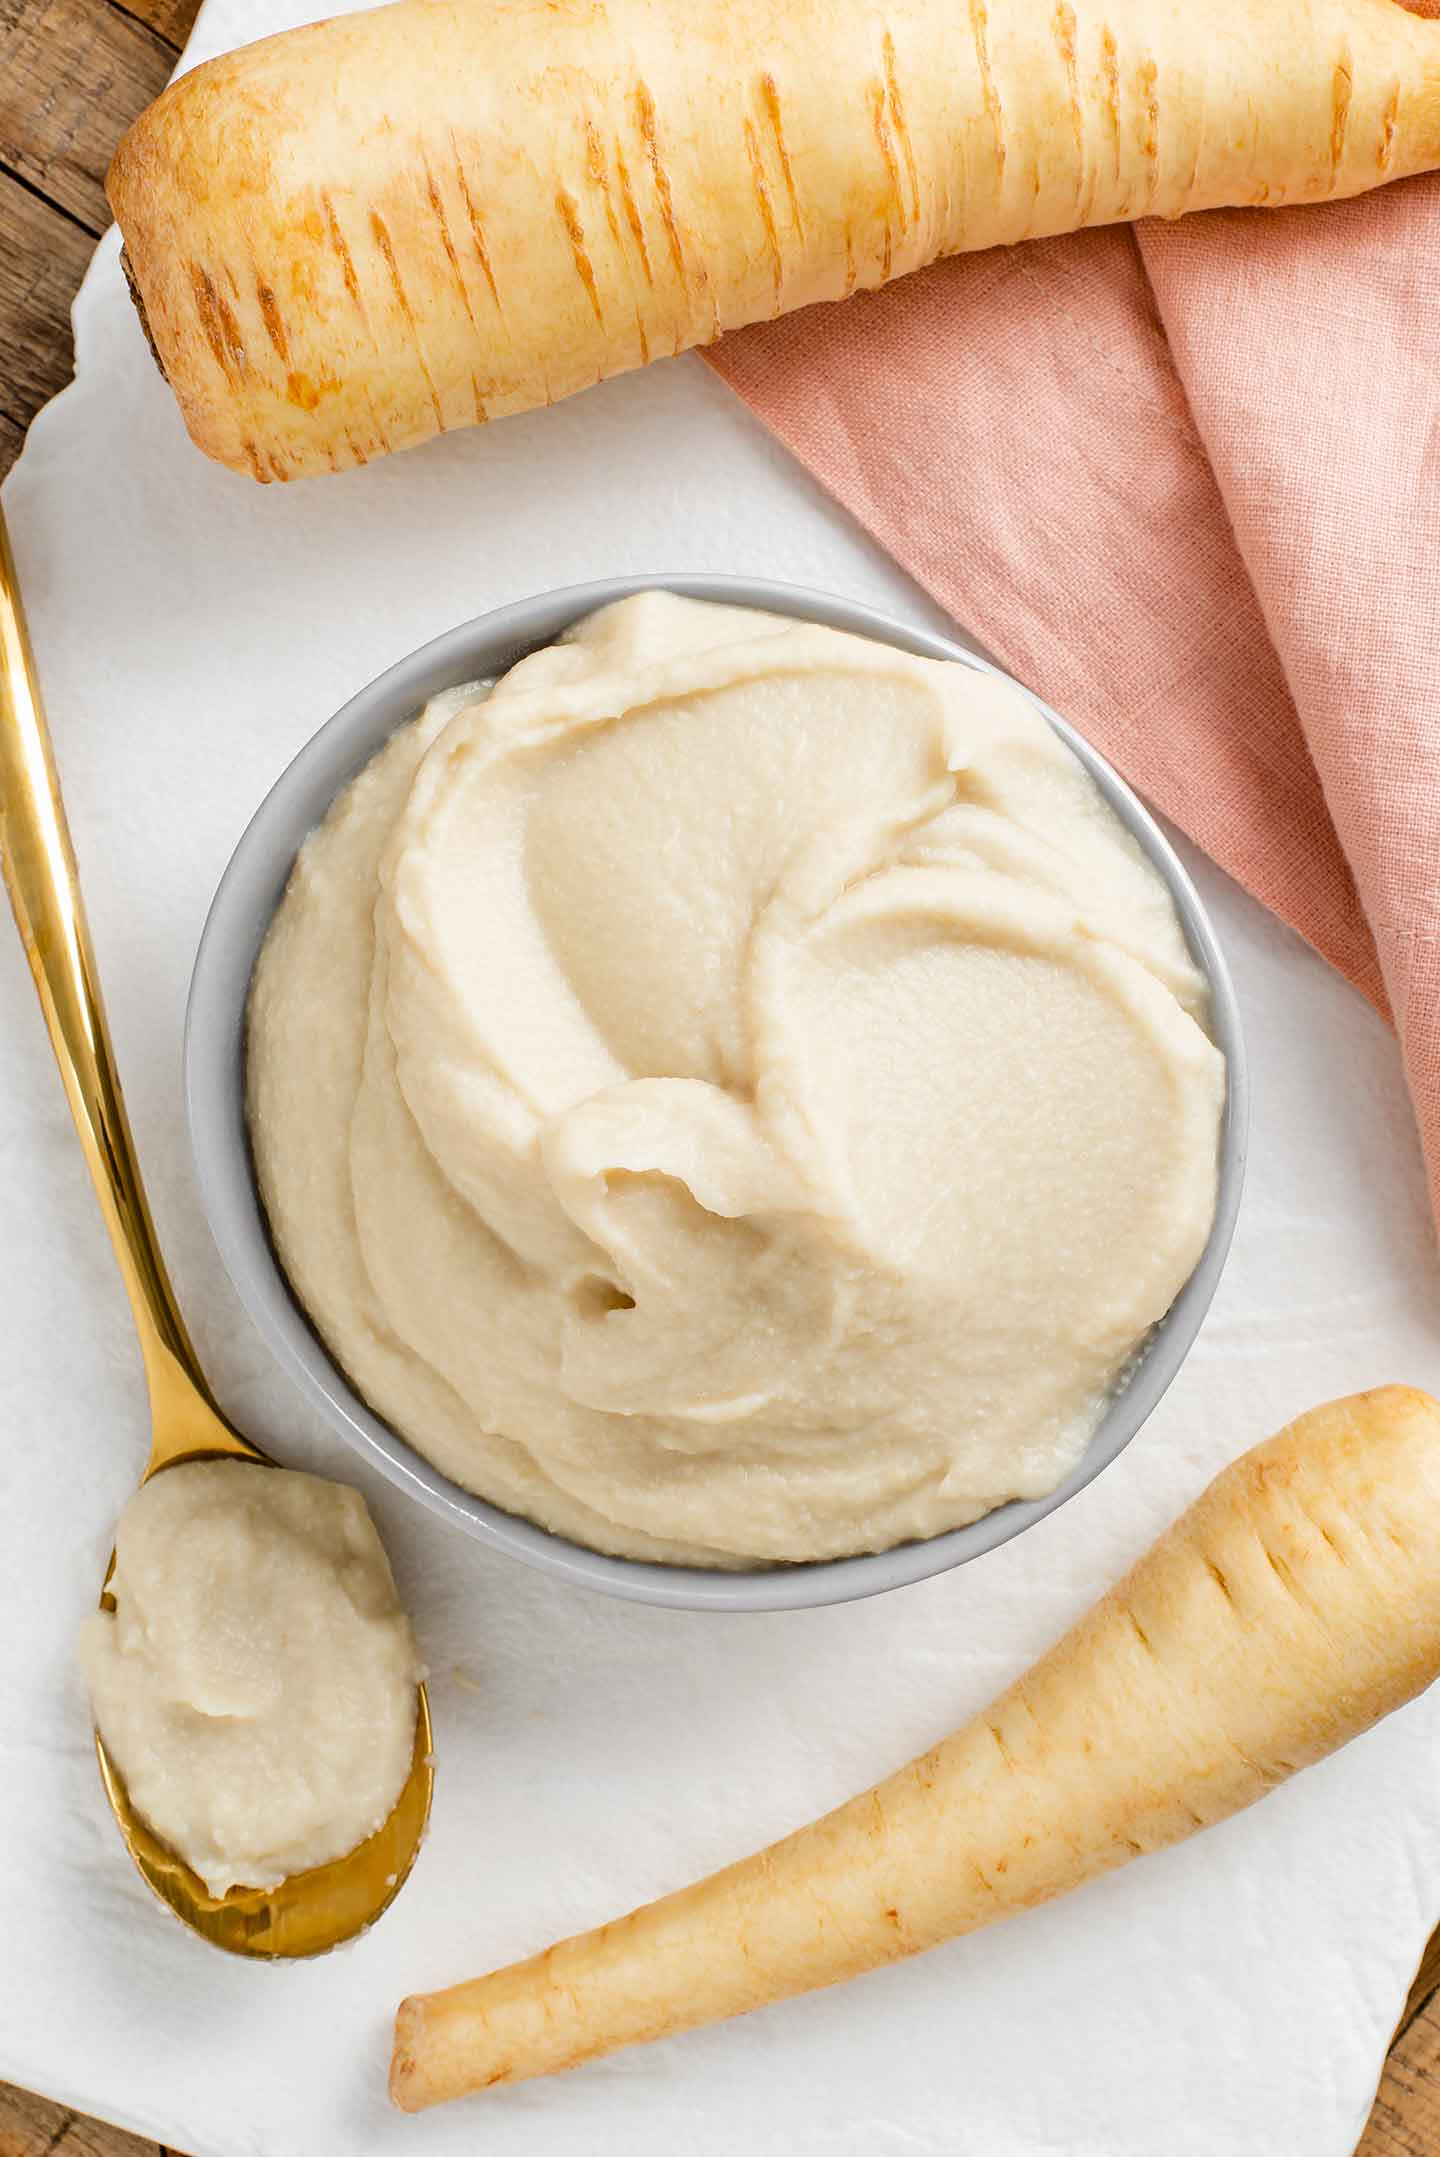 Top down view of a creamy parsnip puree filling a small bowl. A spoon with the creamy mixture lays beside the bowl and whole parsnips are on the edge of the photo.